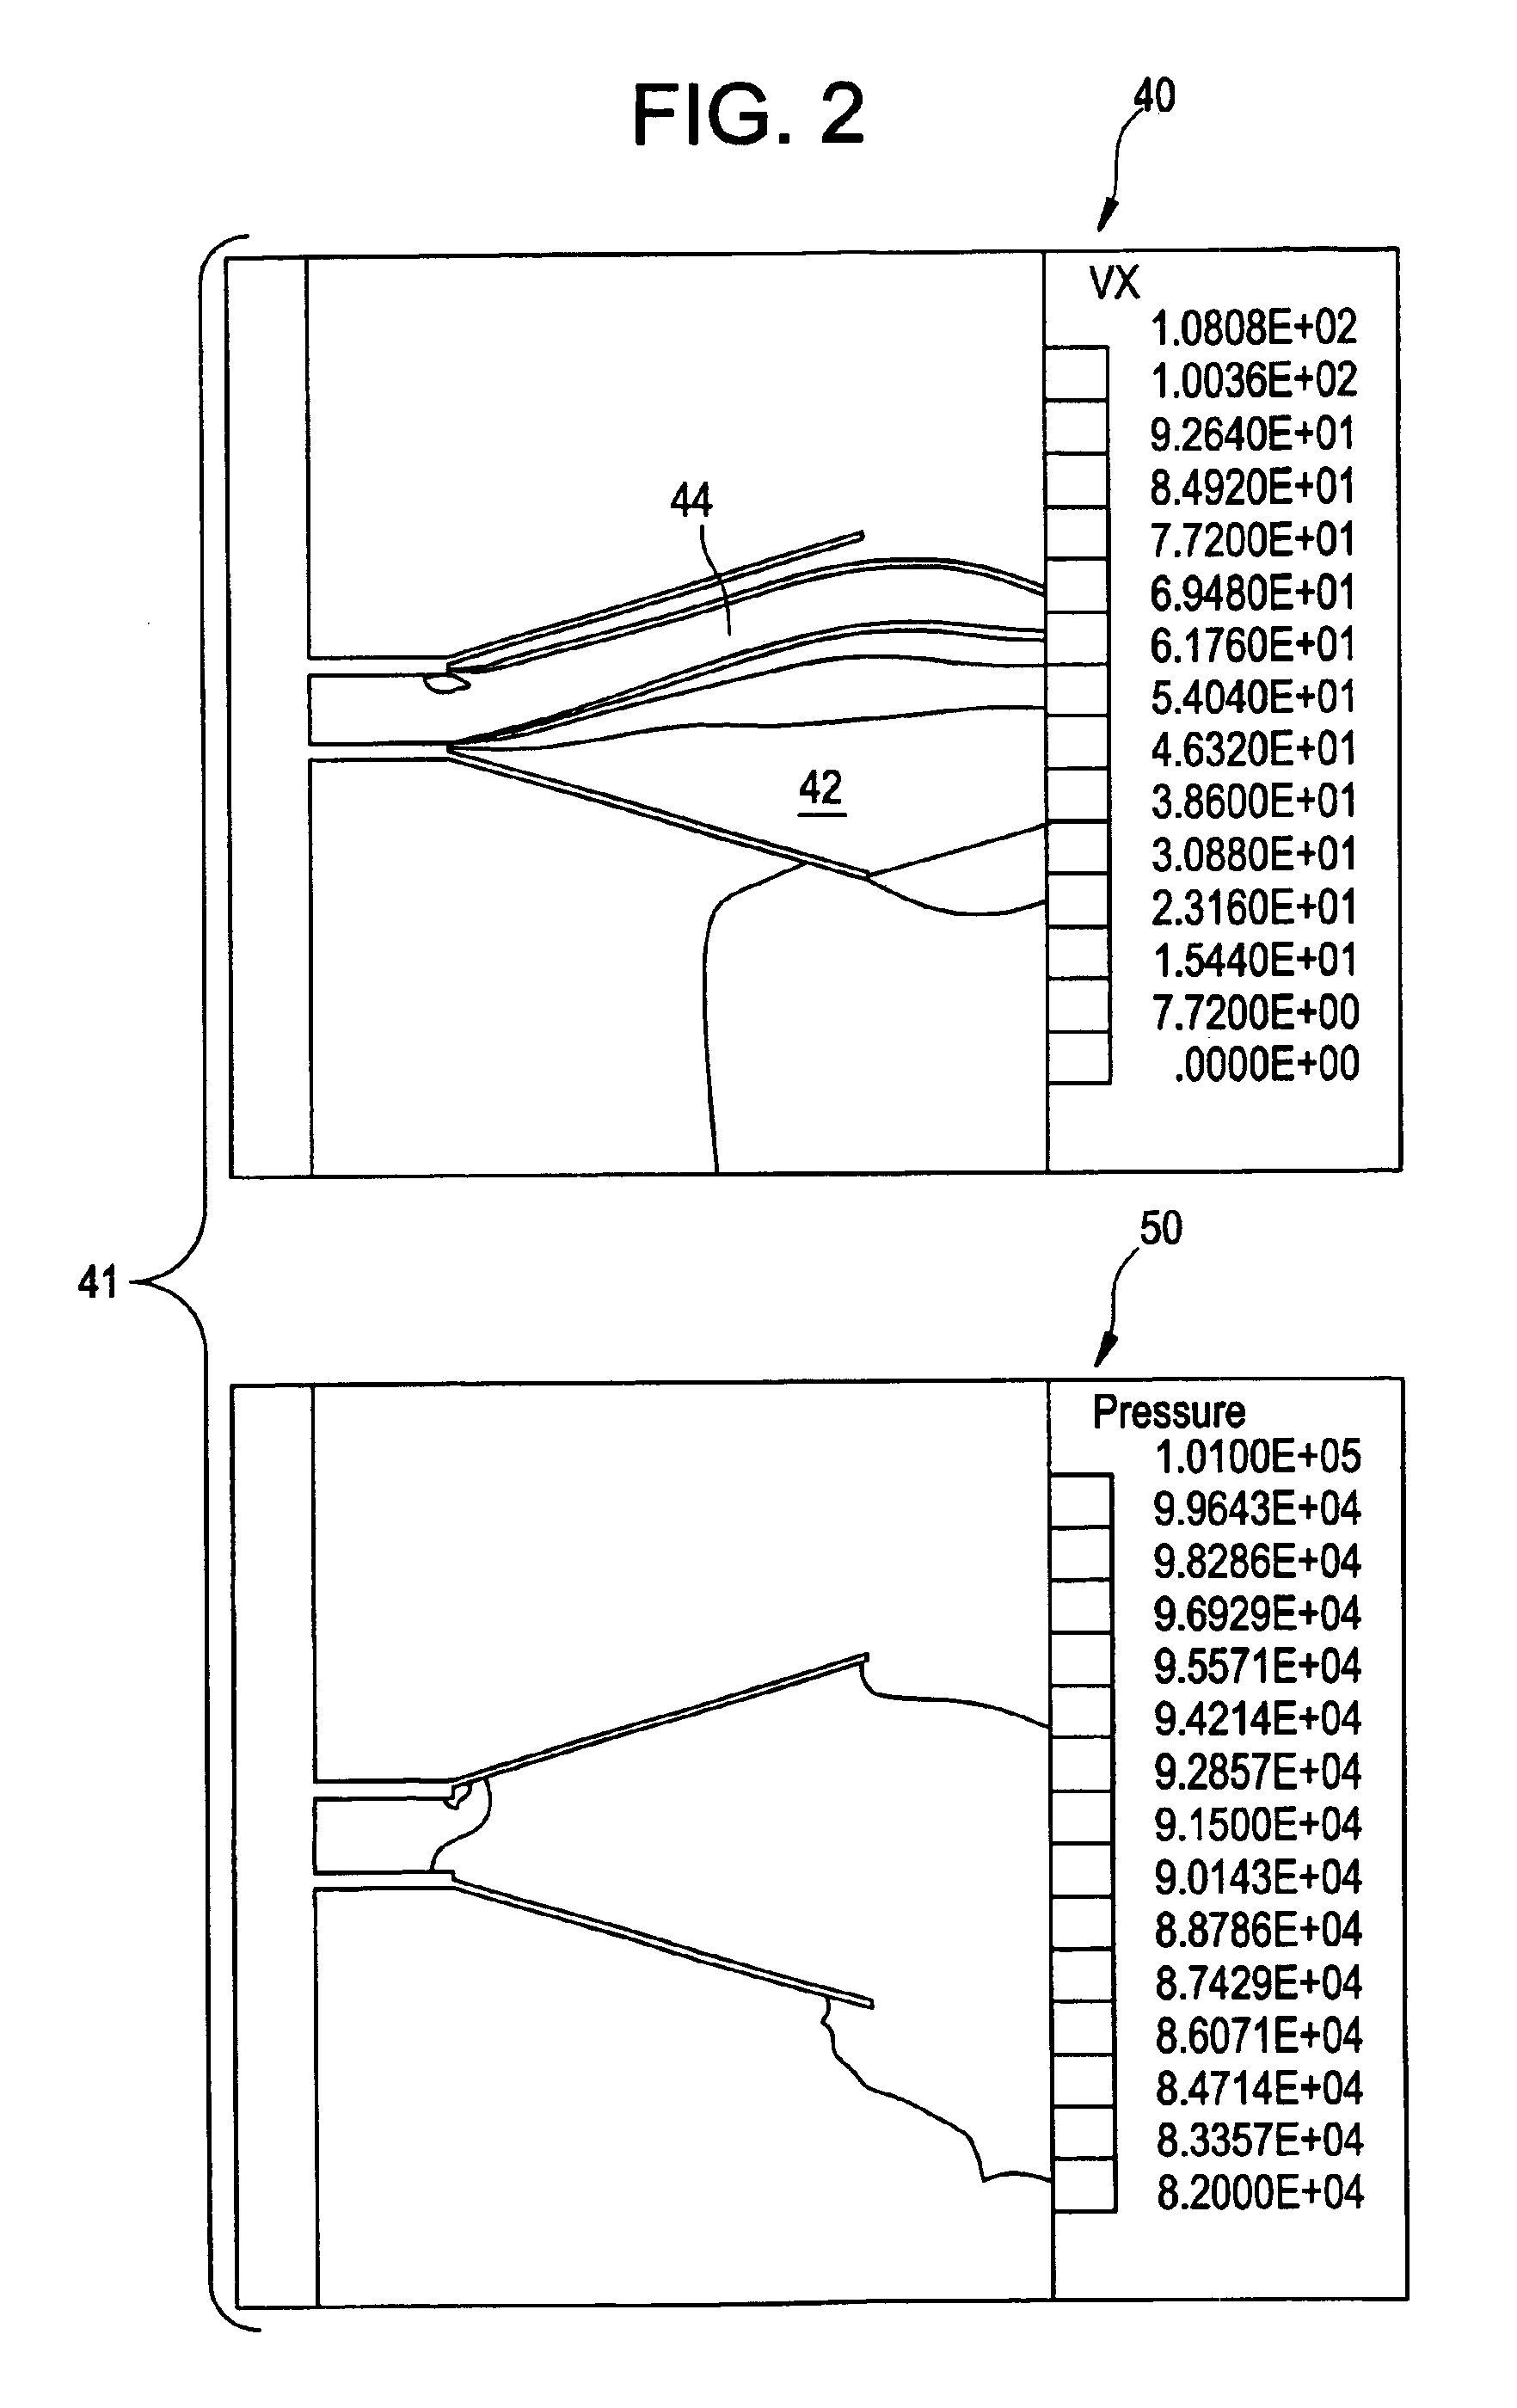 Fluidic actuation for improved diffuser performance